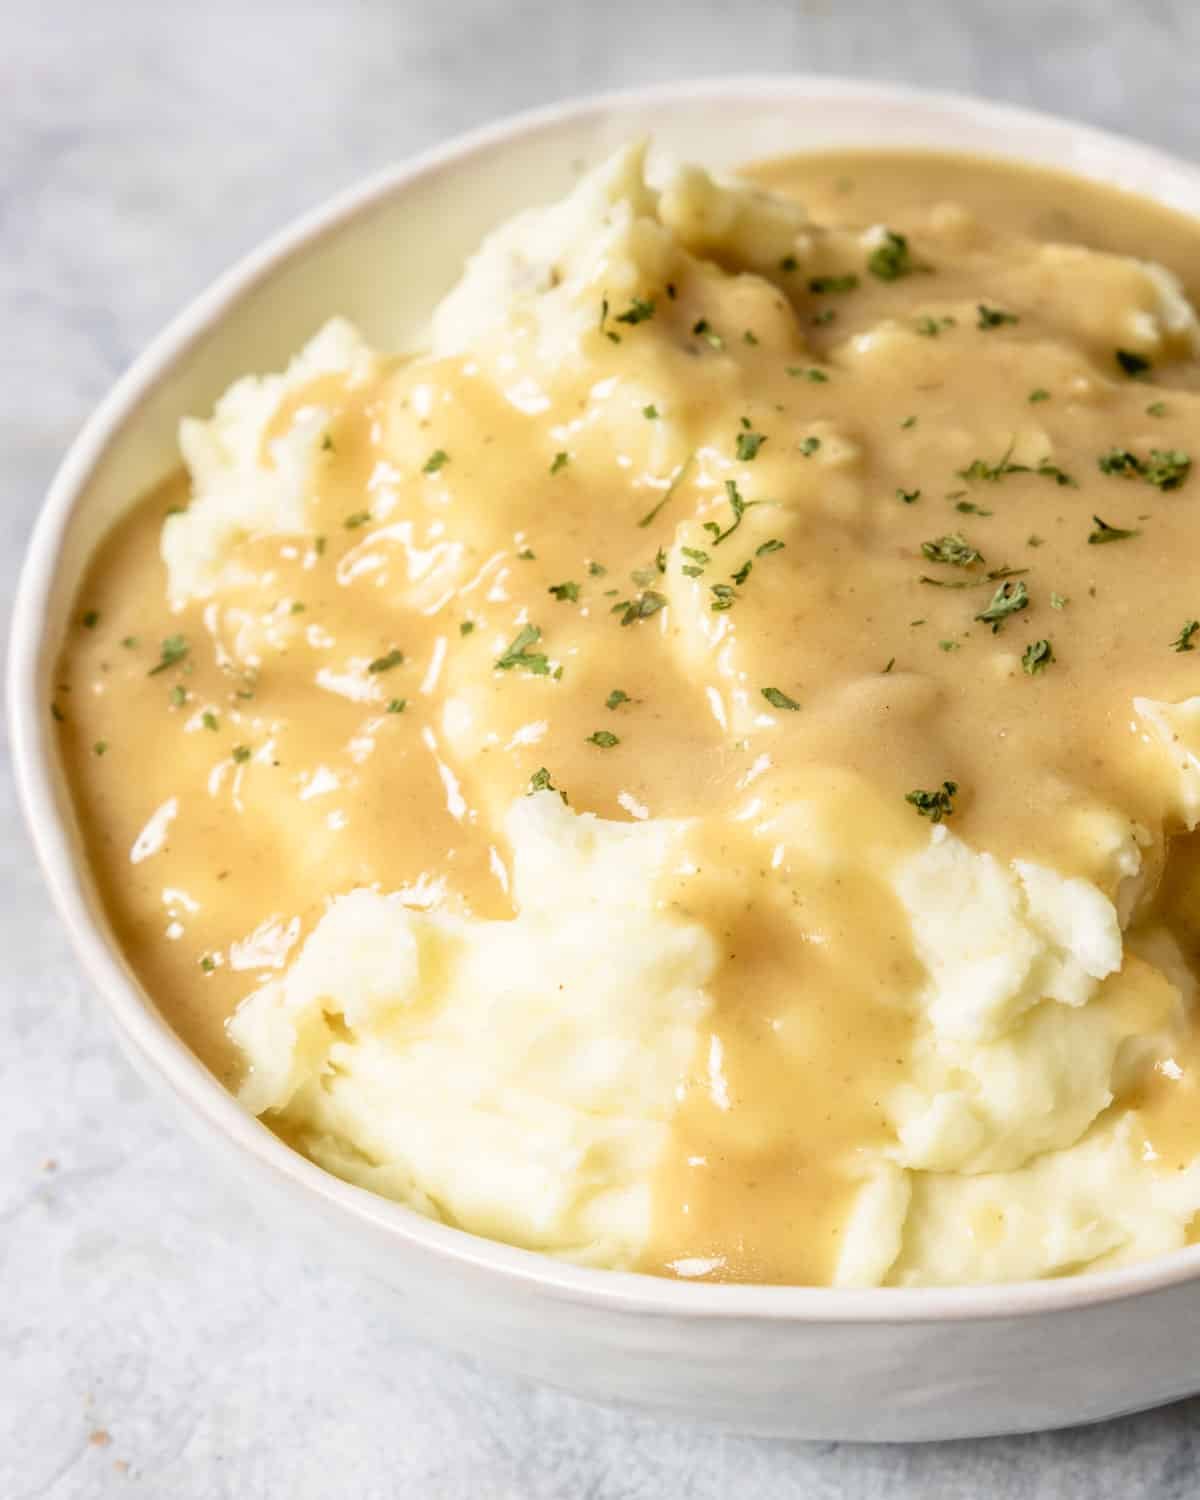 gravy poured over mashed potatoes with parsley garnish